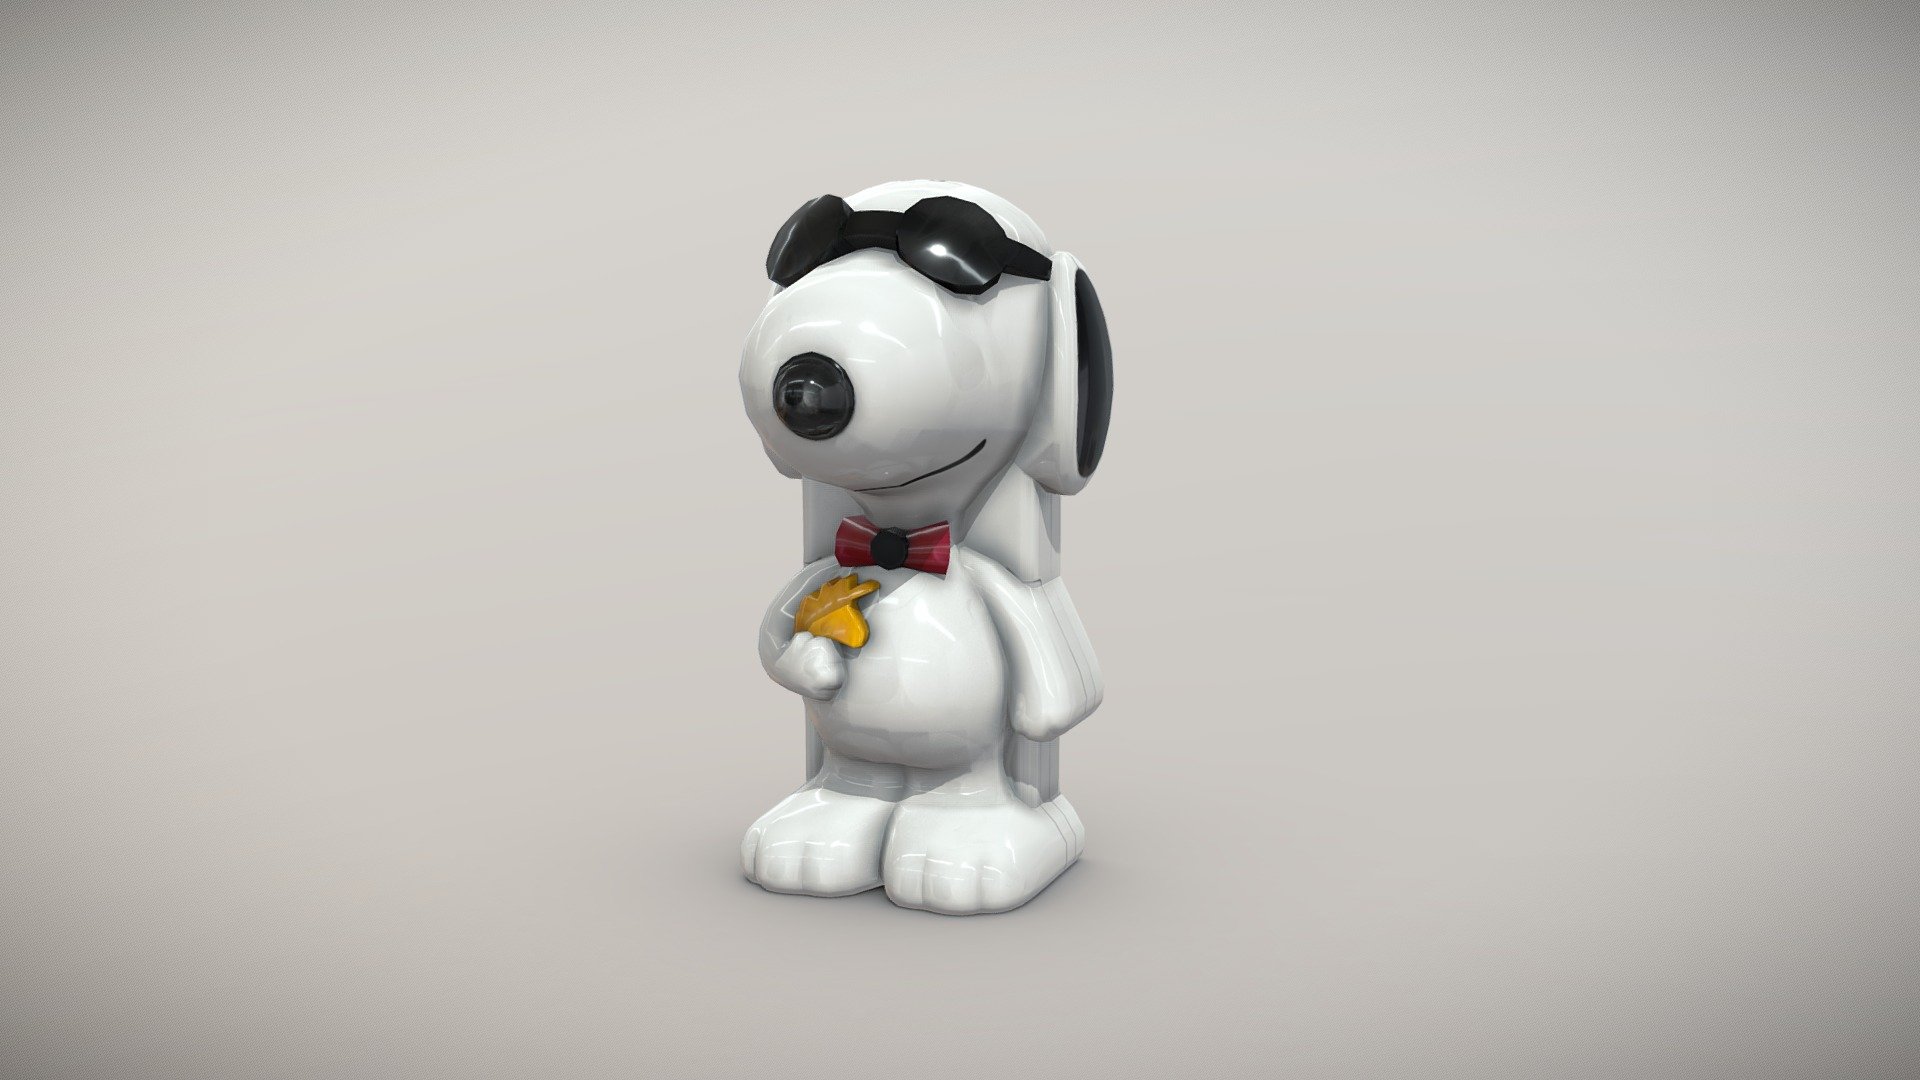 •   Let me present to you simple low-poly 3D model BB-mobile Dog. Modeling was made with ortho-photos of real phone that is why all details of design are recreated most authentically.

•    This model consists of one mesh, it is low-polygonal and it has only one material.

•   The total of the main textures is 1. Resolution of texture is 3000 pixels square aspect ratio in .jpg format. 

•   Polygon count of the model is – 2071.

•   The model has correct dimensions in real-world scale. All parts grouped and named correctly.

•   To use the model in other 3D programs there are scenes saved in formats .fbx, .obj, .DAE, .max (2010 version).

Note: If you see some artifacts on the textures, it means compression works in the Viewer. We recommend setting HD quality for textures. But anyway, original textures have no artifacts 3d model